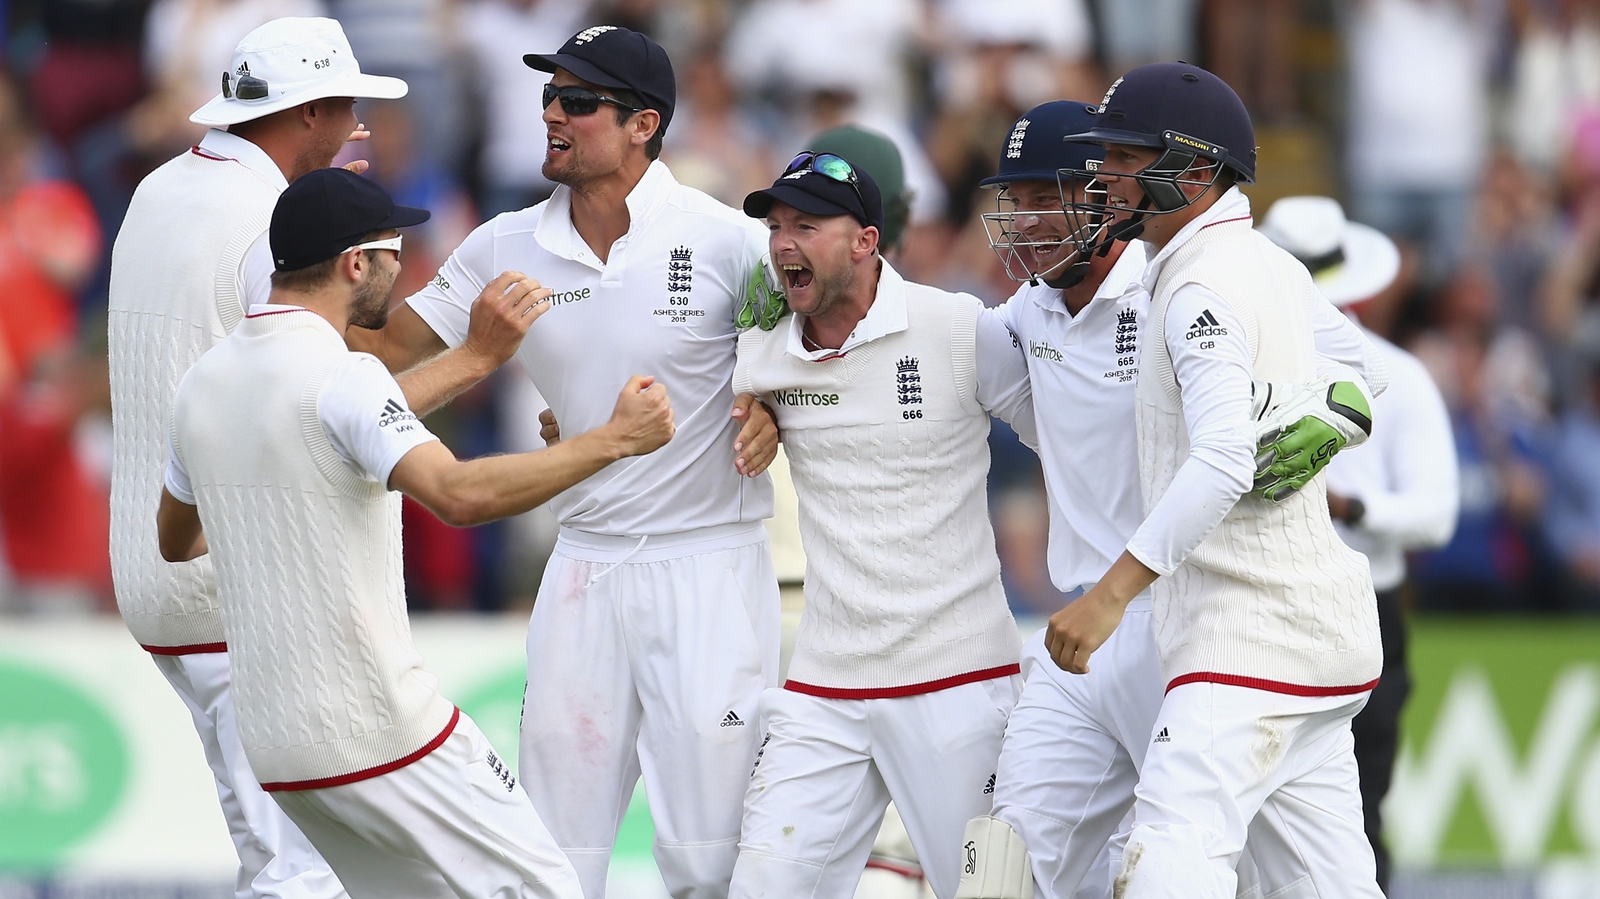 England win the Ashes after facile Test victory